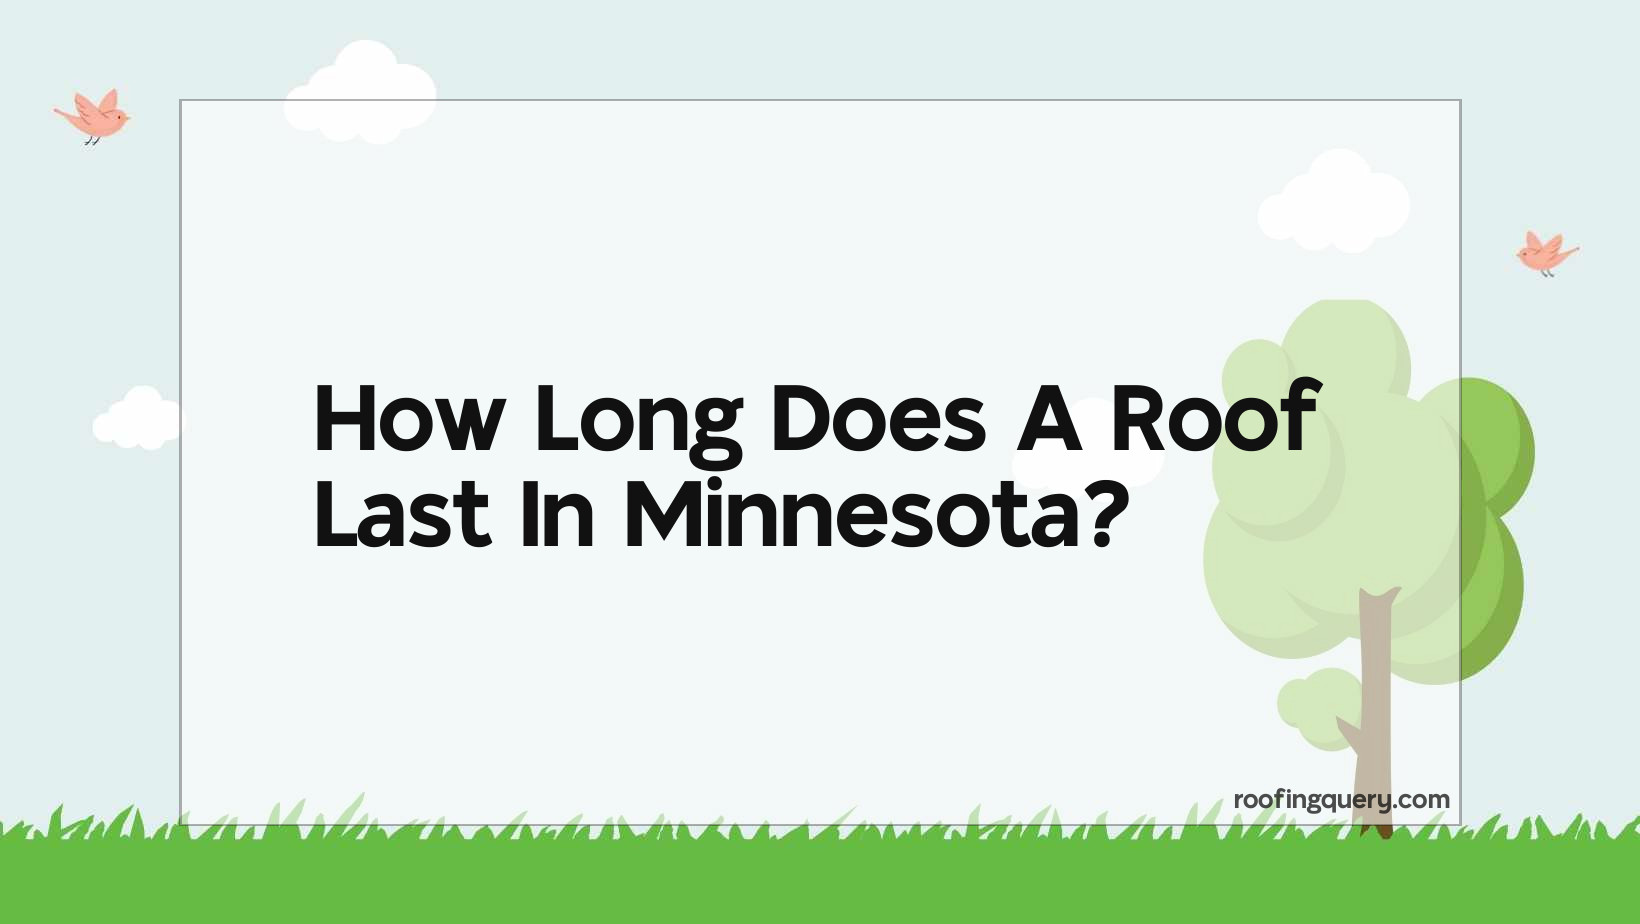 How Long Does A Roof Last In Minnesota?